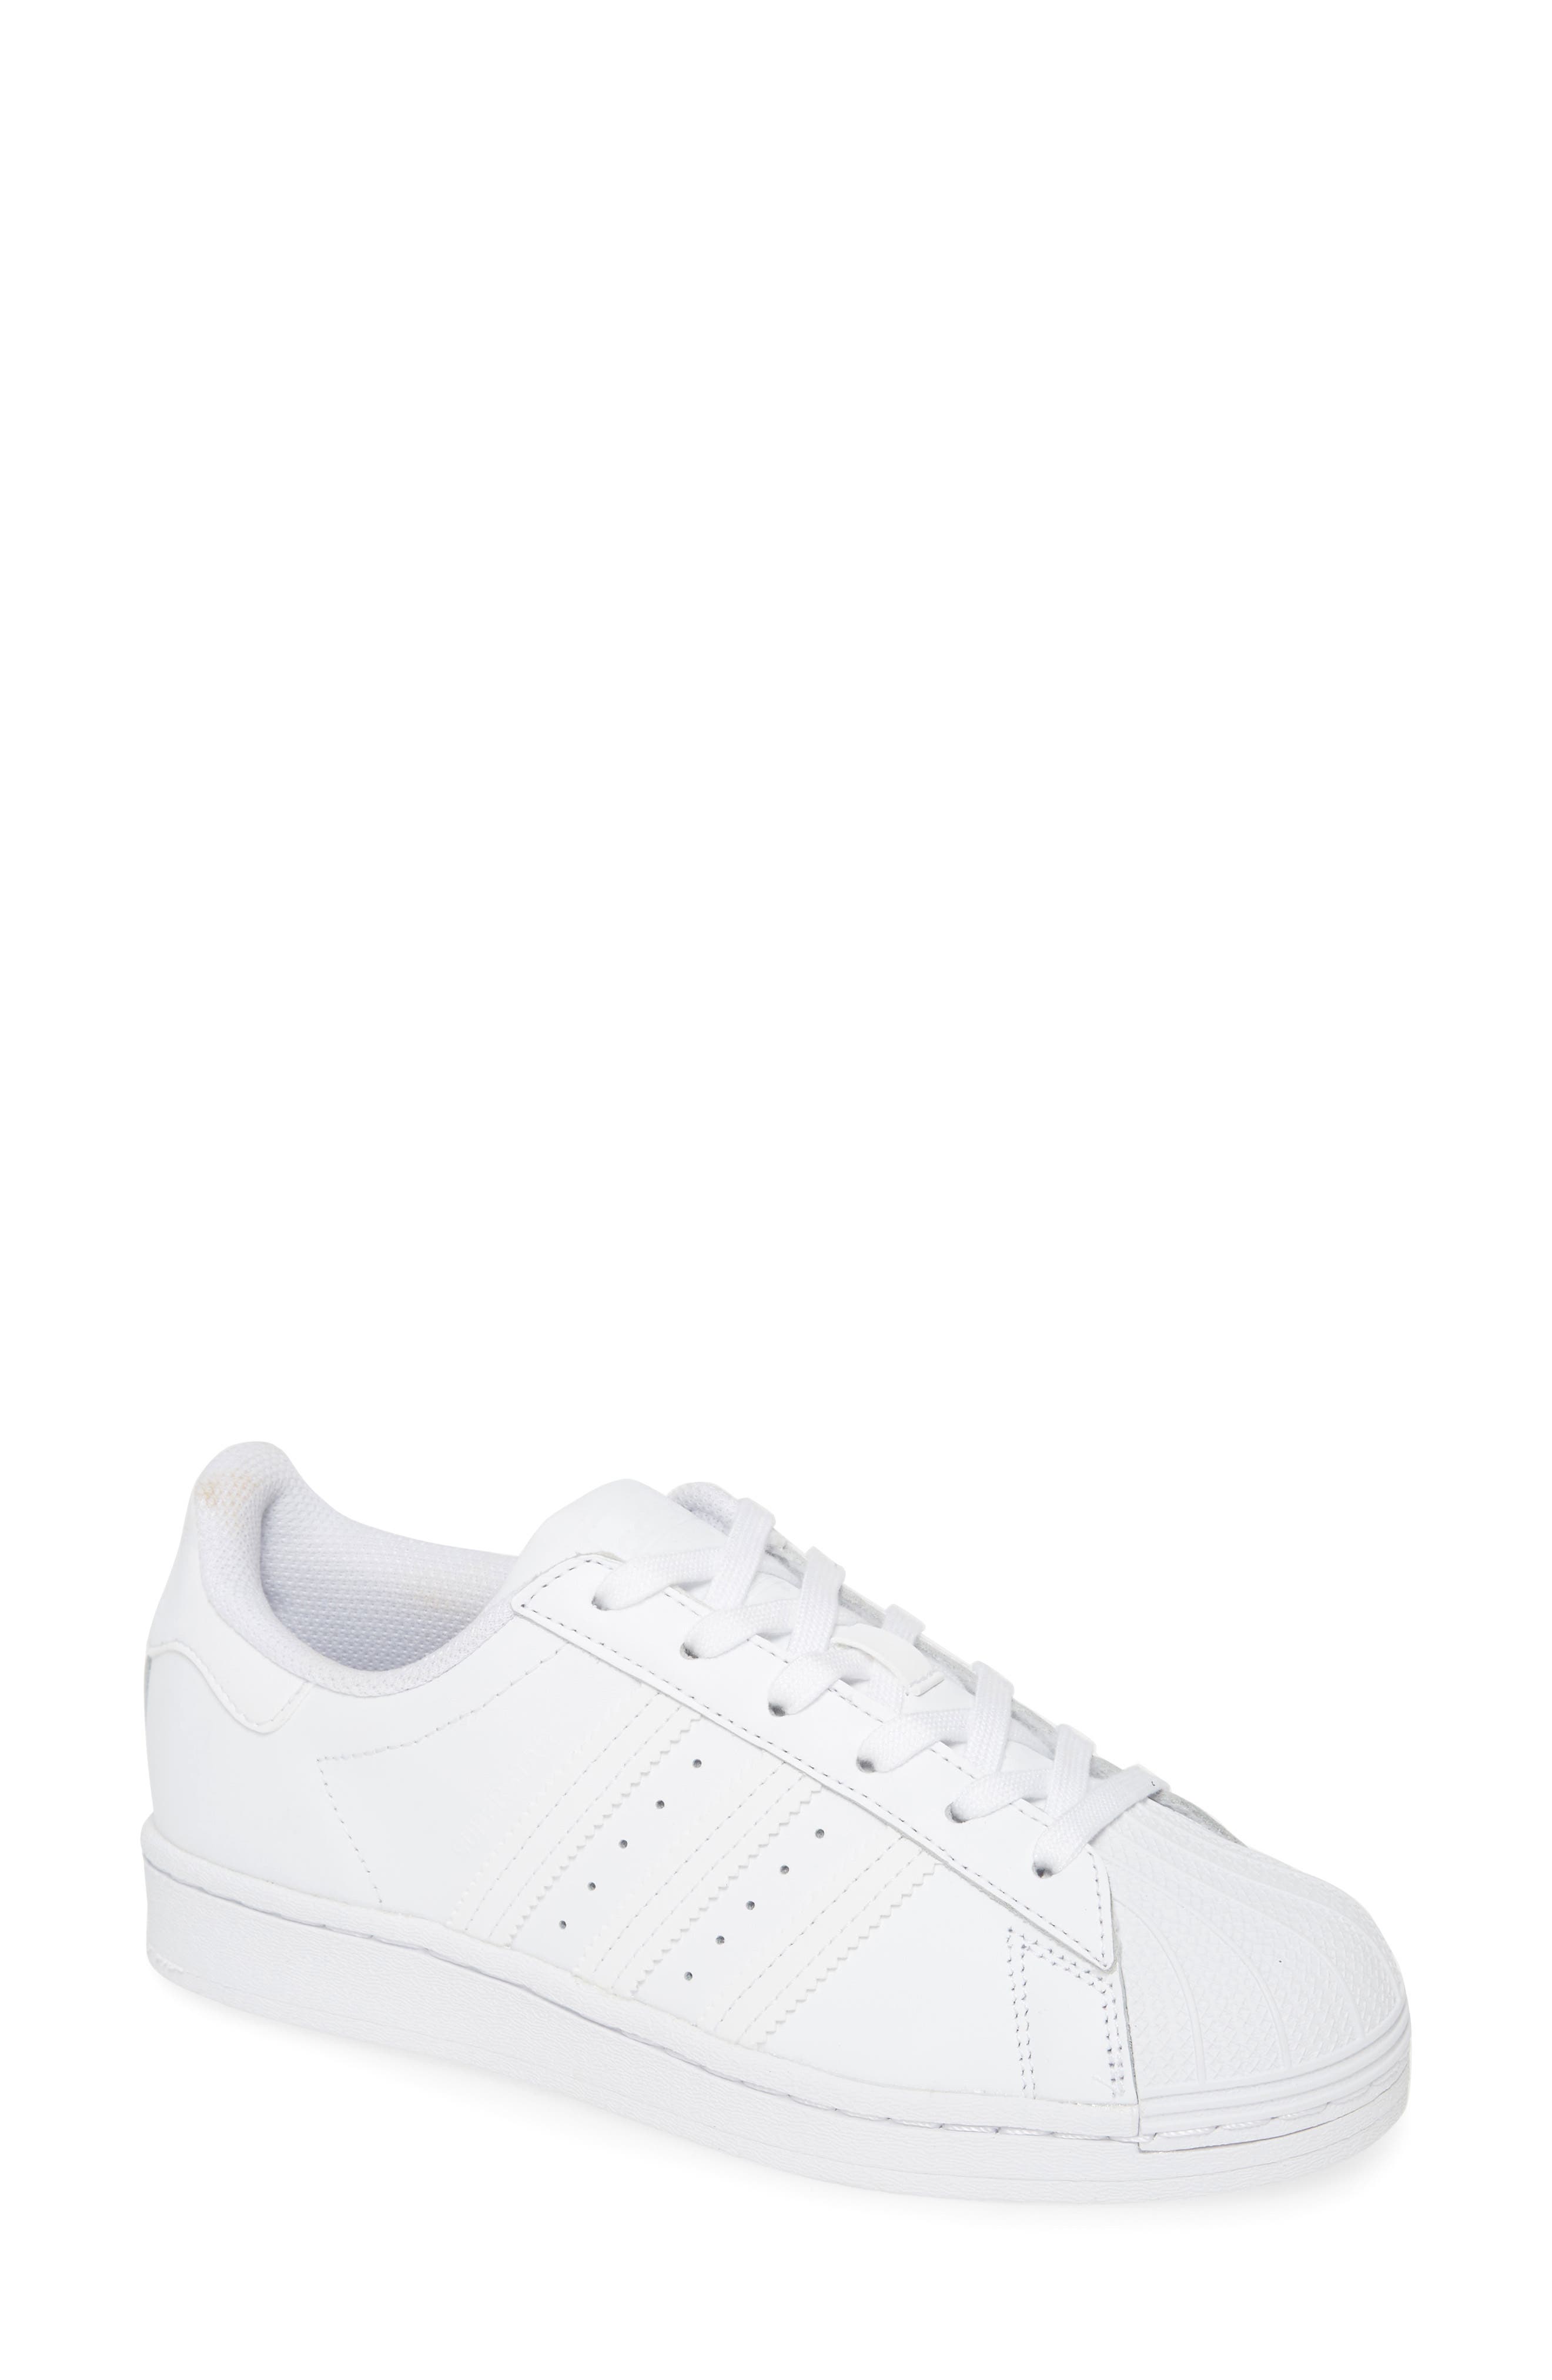 adidas women's shoes nordstrom rack